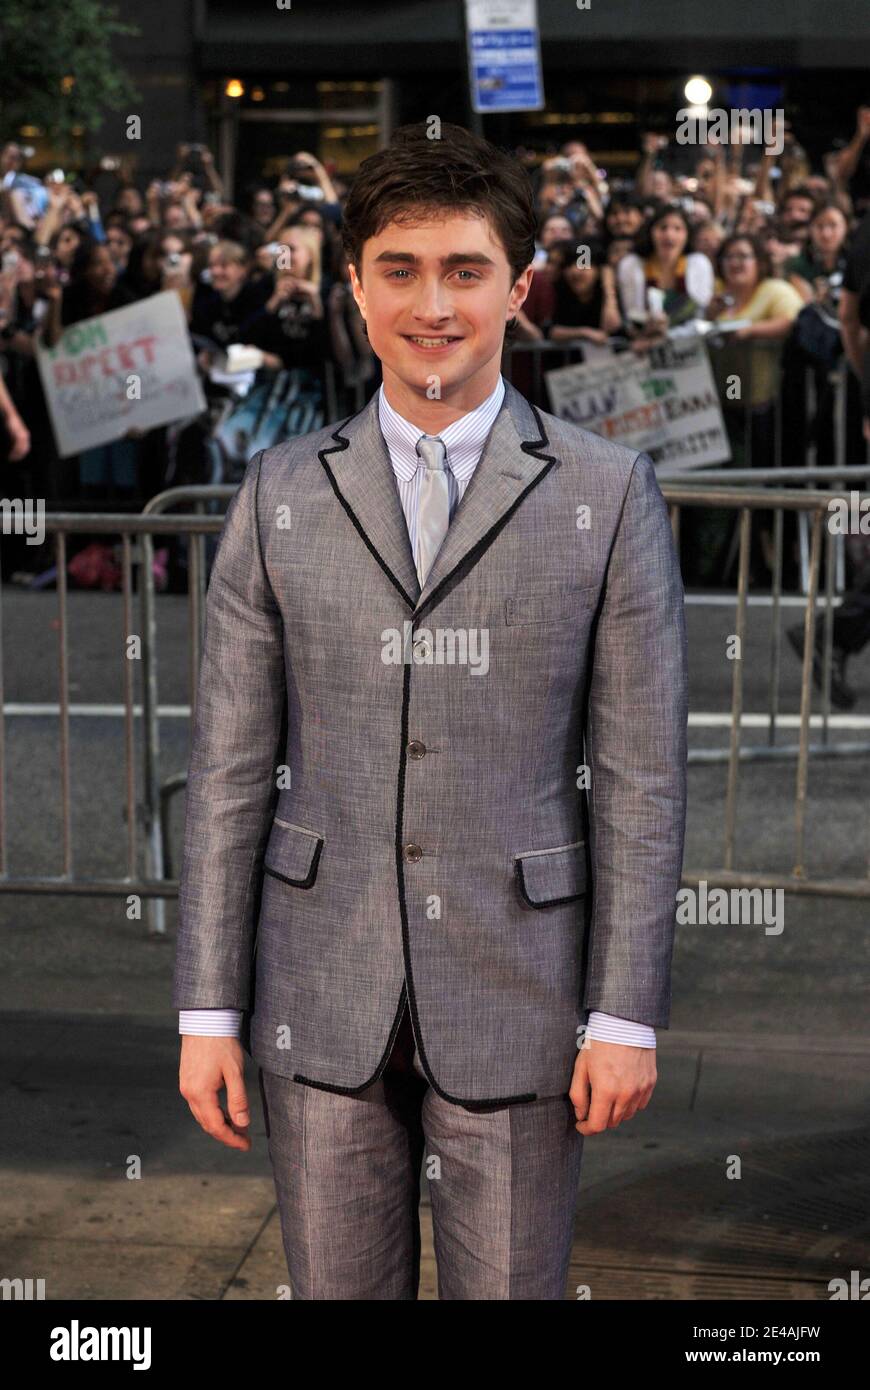 'Actor Daniel Radcliffe attends the North American Premiere of ''Harry Potter and the Half-Blood Prince at the Ziegfeld Theatre in New York City, NY, USA on July 9, 2009. Photo by S.Vlasic/ABACAPRESS.COM (Pictured: Daniel Radcliffe)' Stock Photo